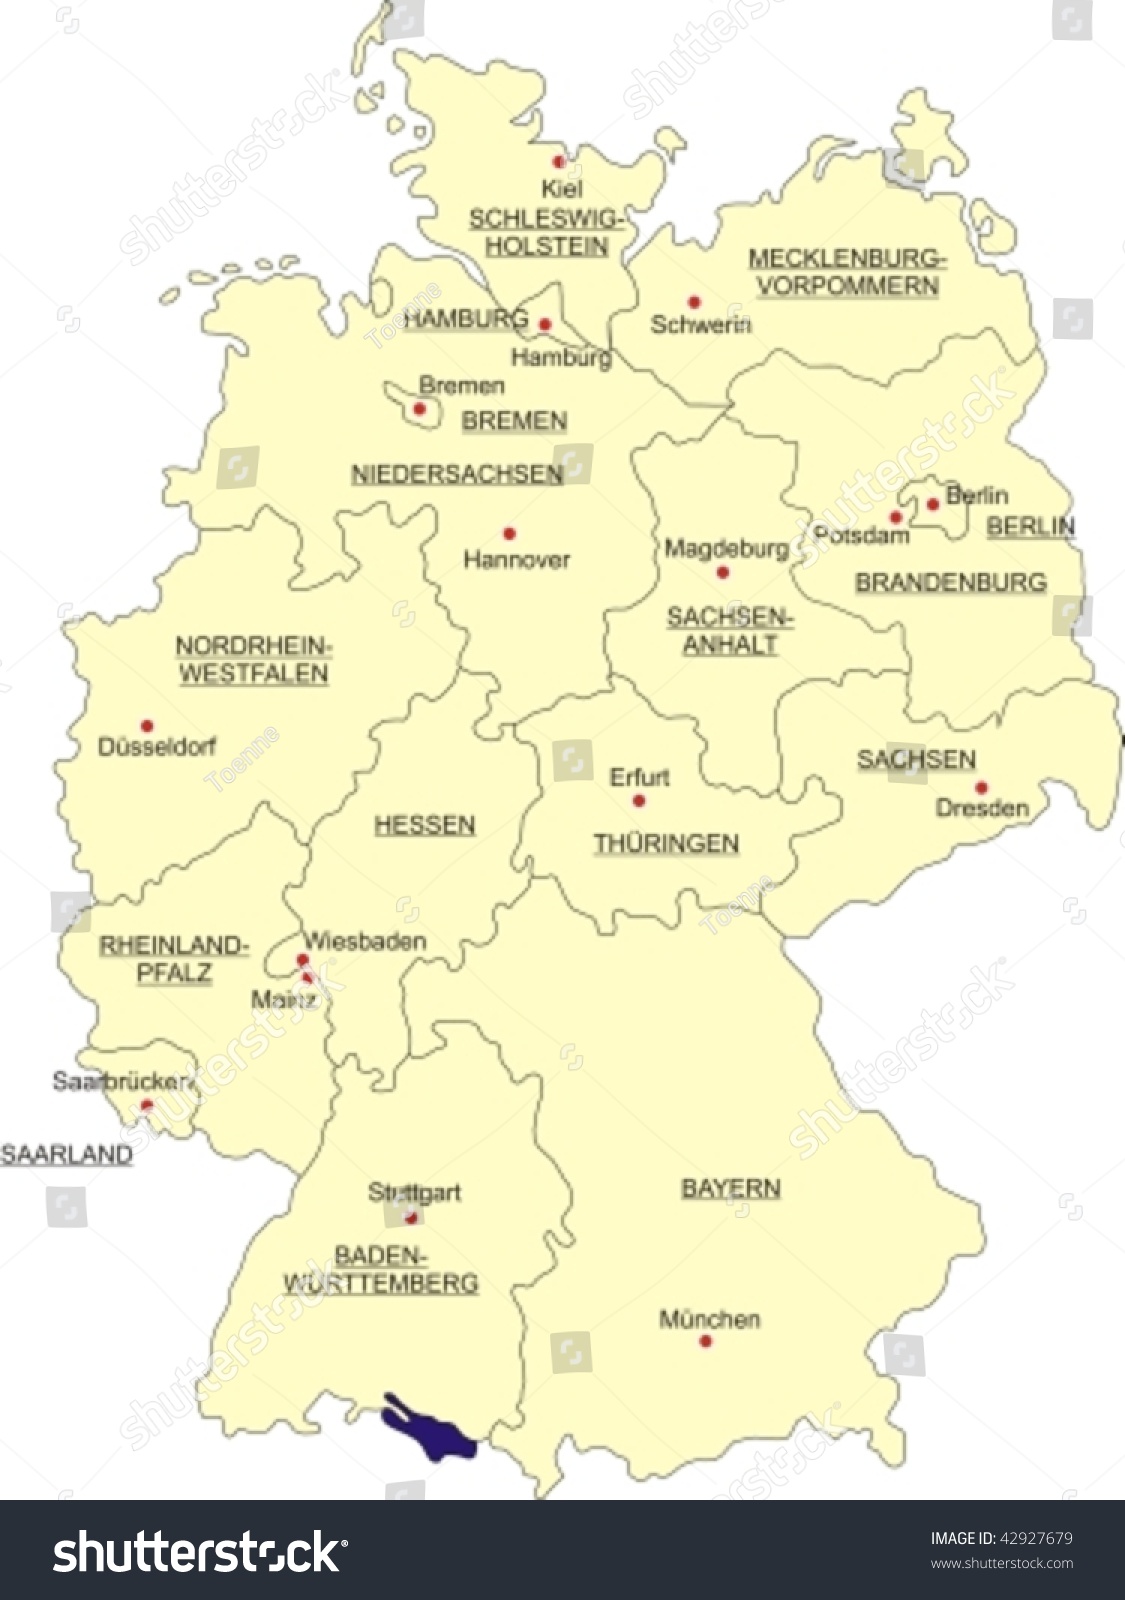 SVG of Map of Germany, national boundaries and national capitals svg